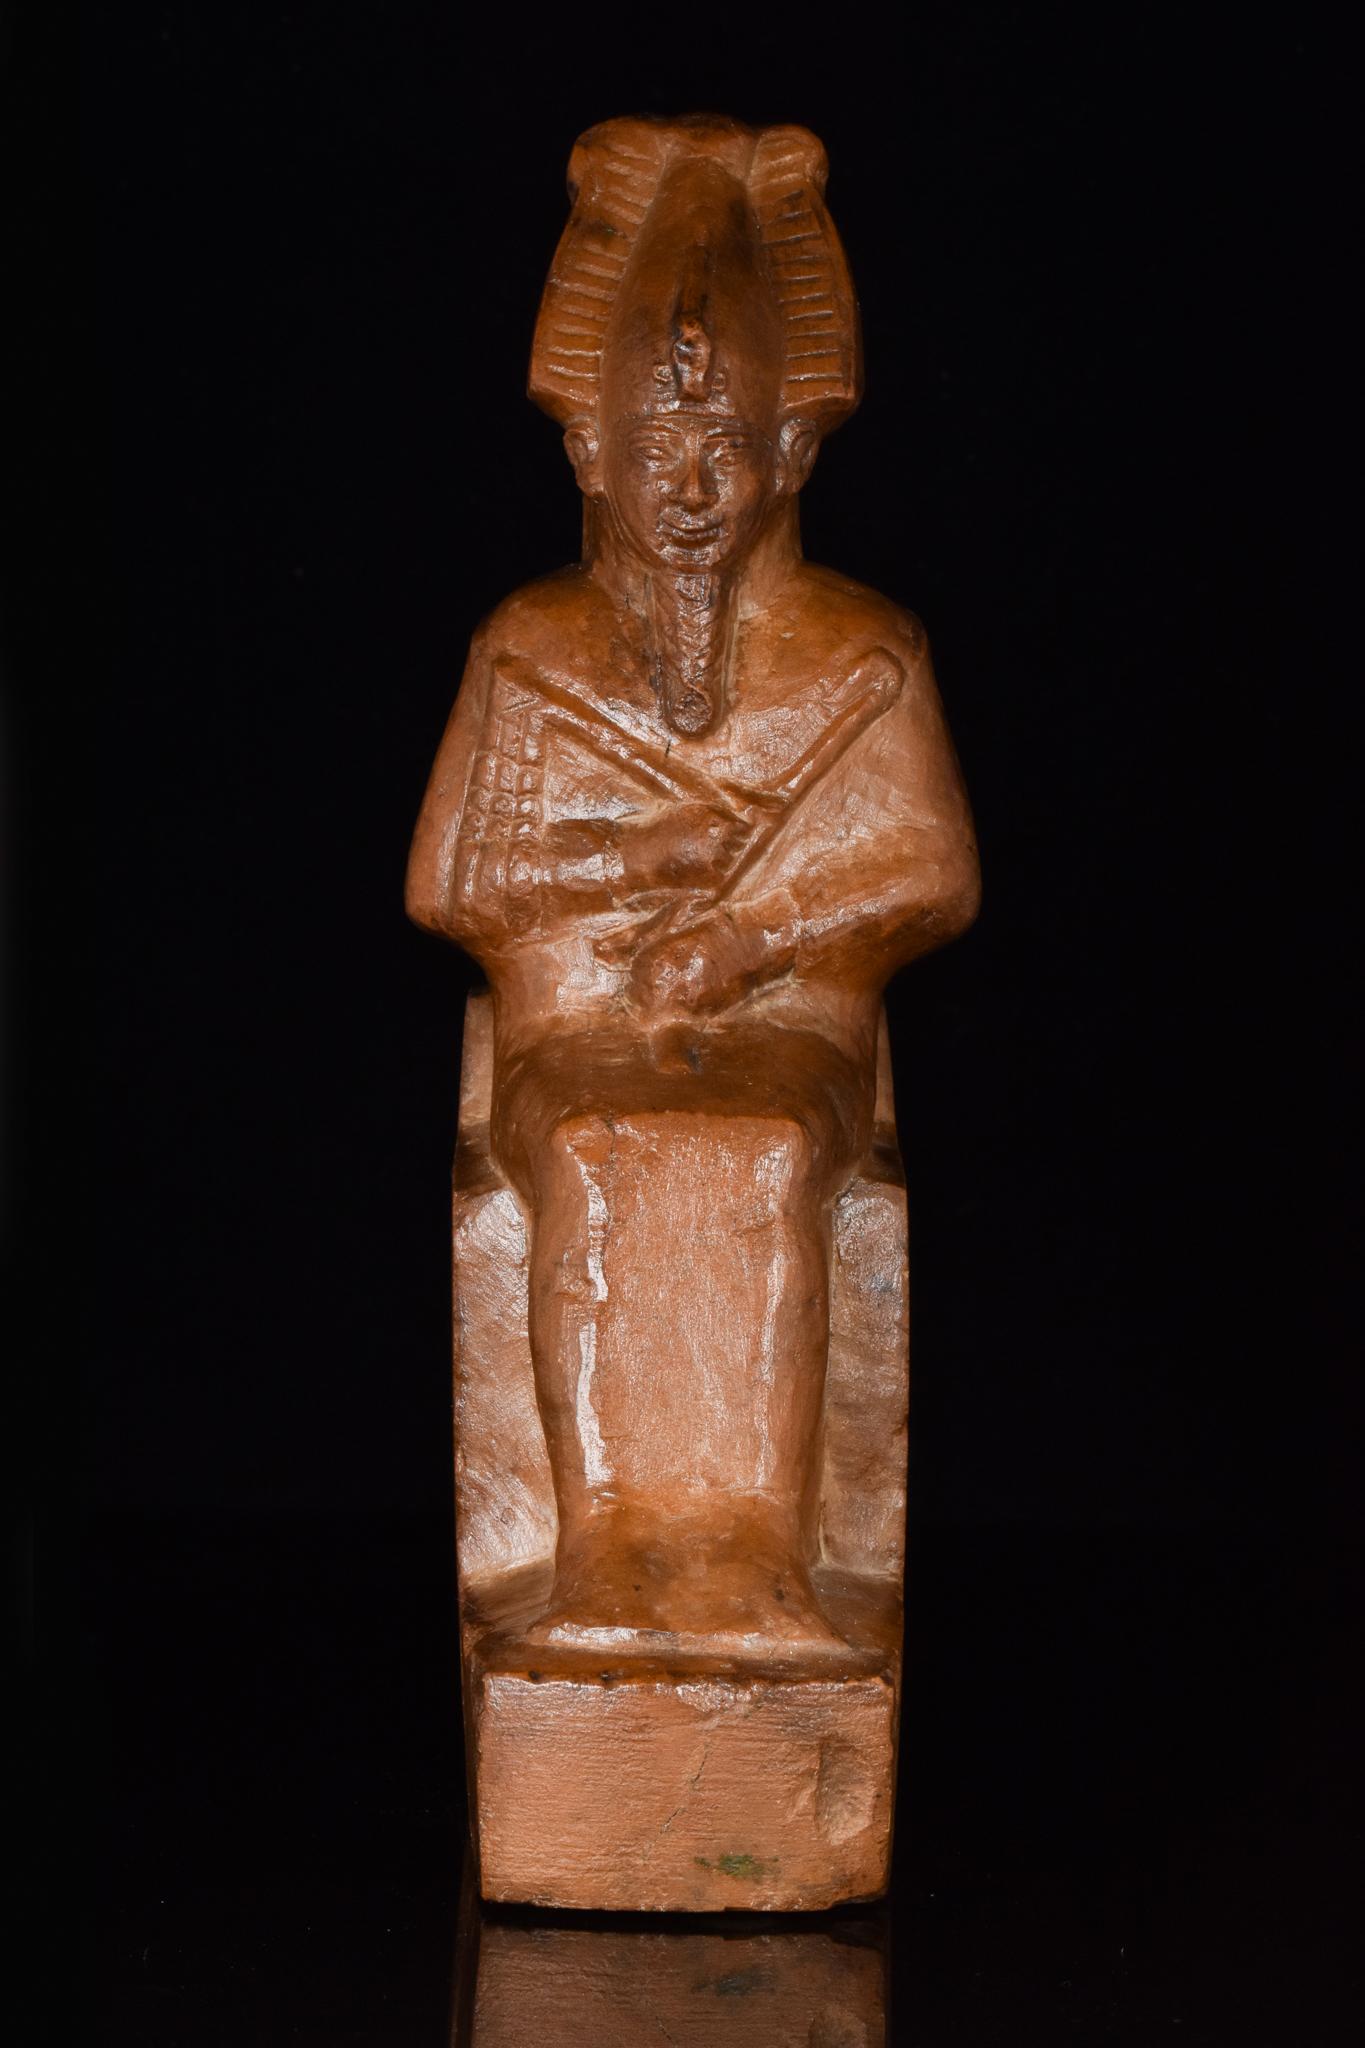 Circa 664-332 BC, Late Dynastic Period

An ancient Egyptian stone statuette depicting the god Osiris. He is shown seated in mummiform with a braided divine bears, an atef-crown, and a peaceful, idealised face. He is posed with the arms folded